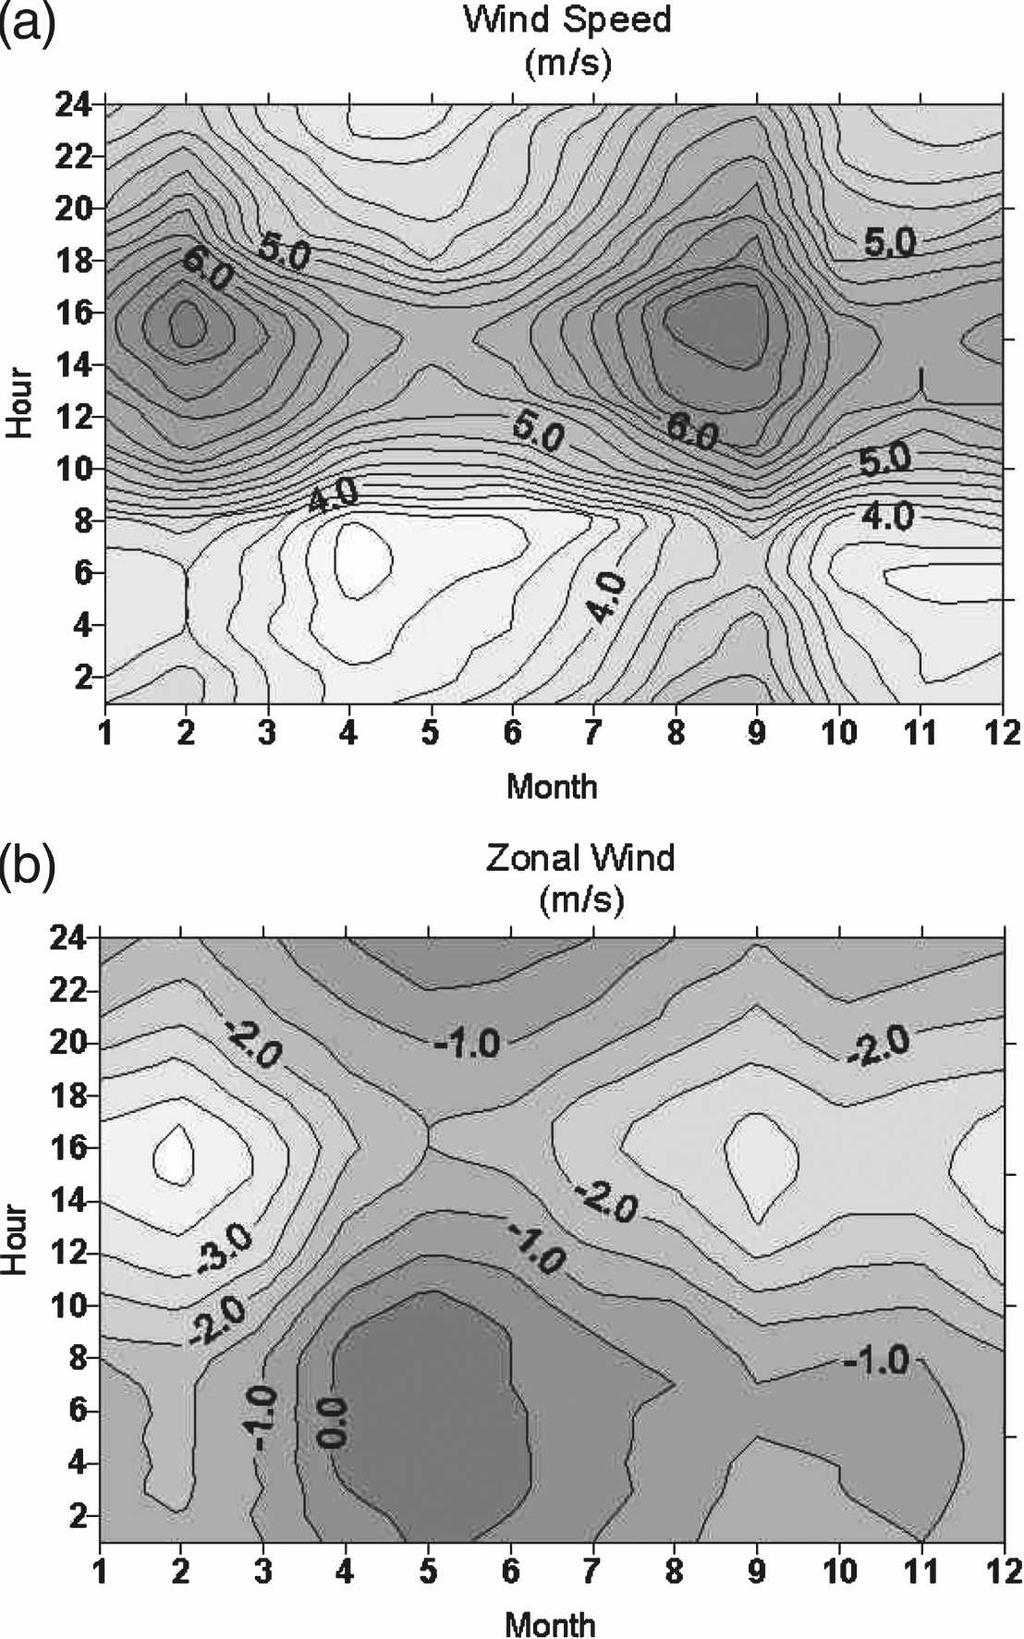 1594 J O U R N A L O F A P P L I E D M E T E O R O L O G Y A N D C L I M A T O L O G Y VOLUME 47 FIG. 4. Diurnal variation of (a) wind speed and (b) zonal wind component (m s 1 ).